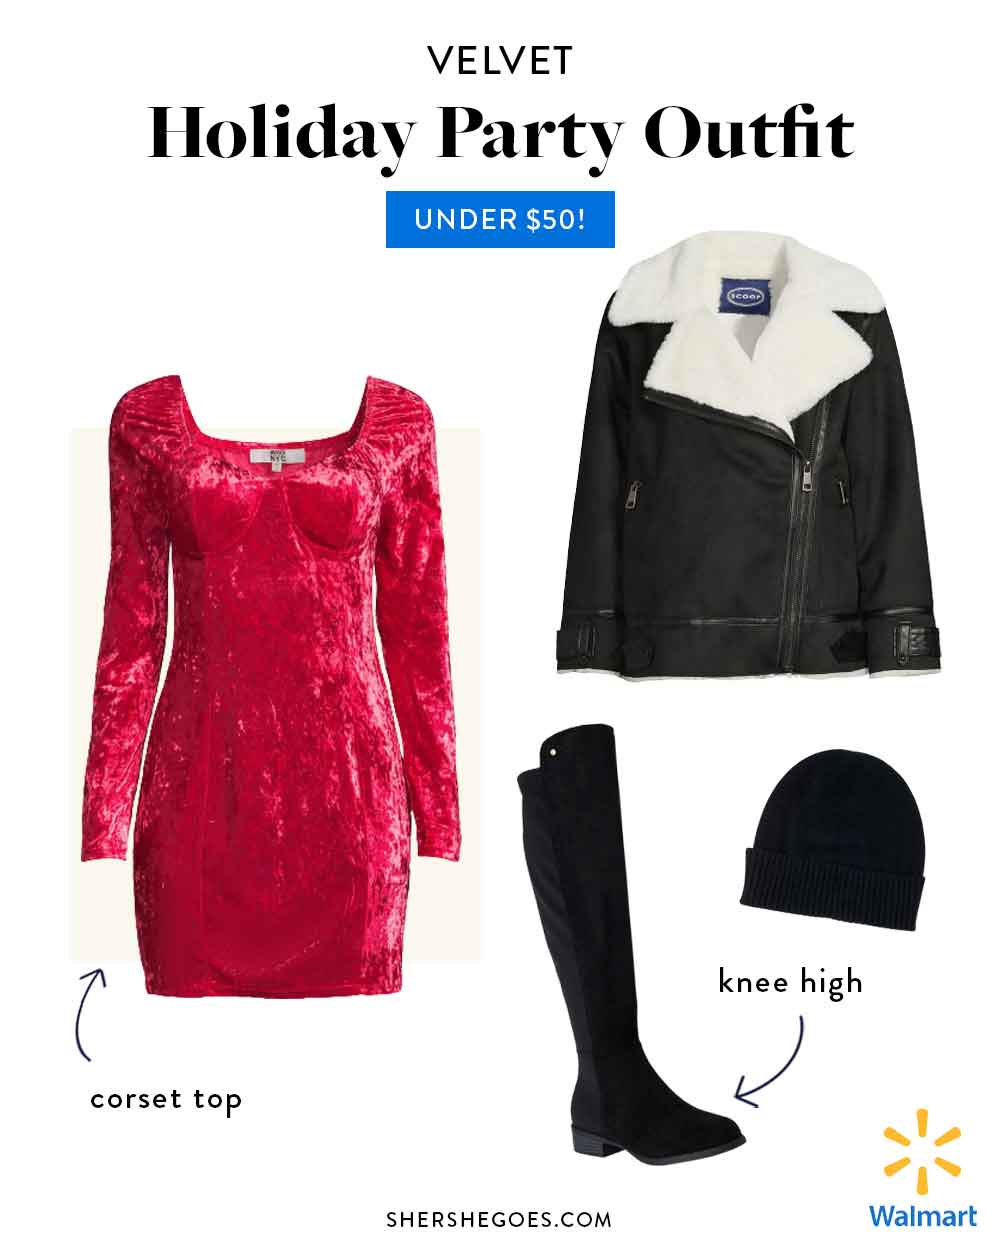 velvet-holiday-party-outfit